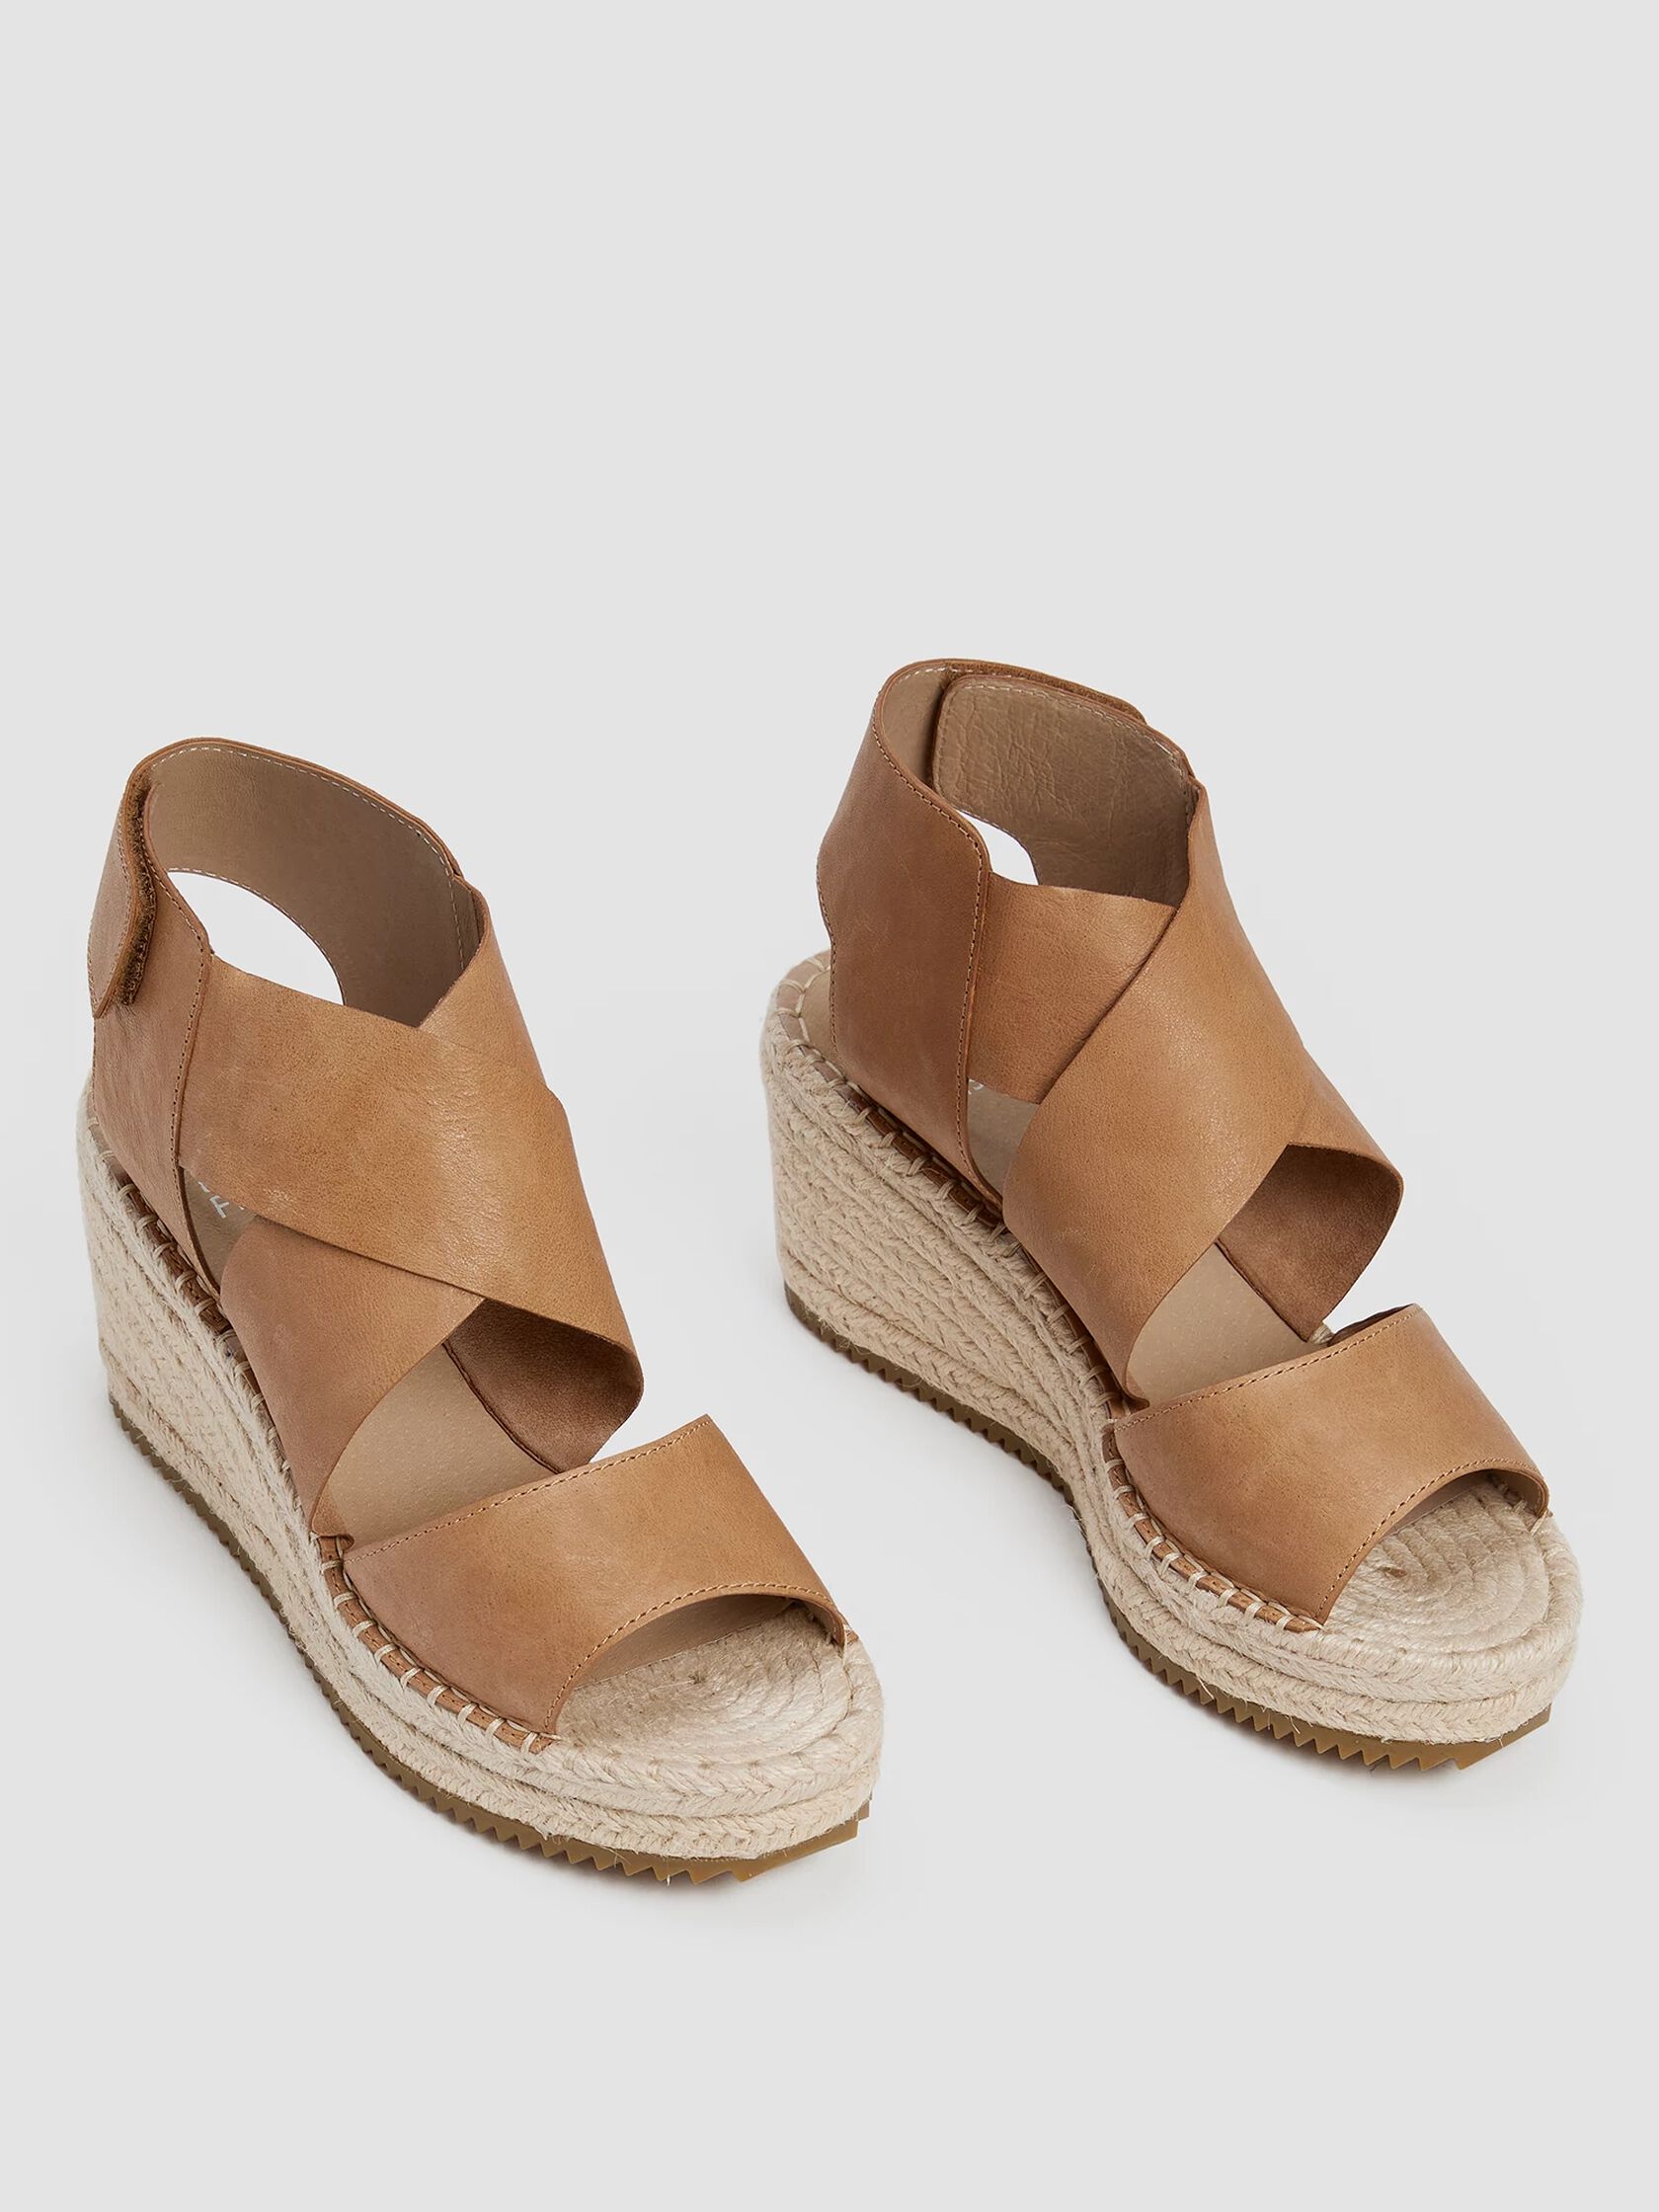 Willow Tumbled Leather Wedge Espadrille | Eileen Fisher